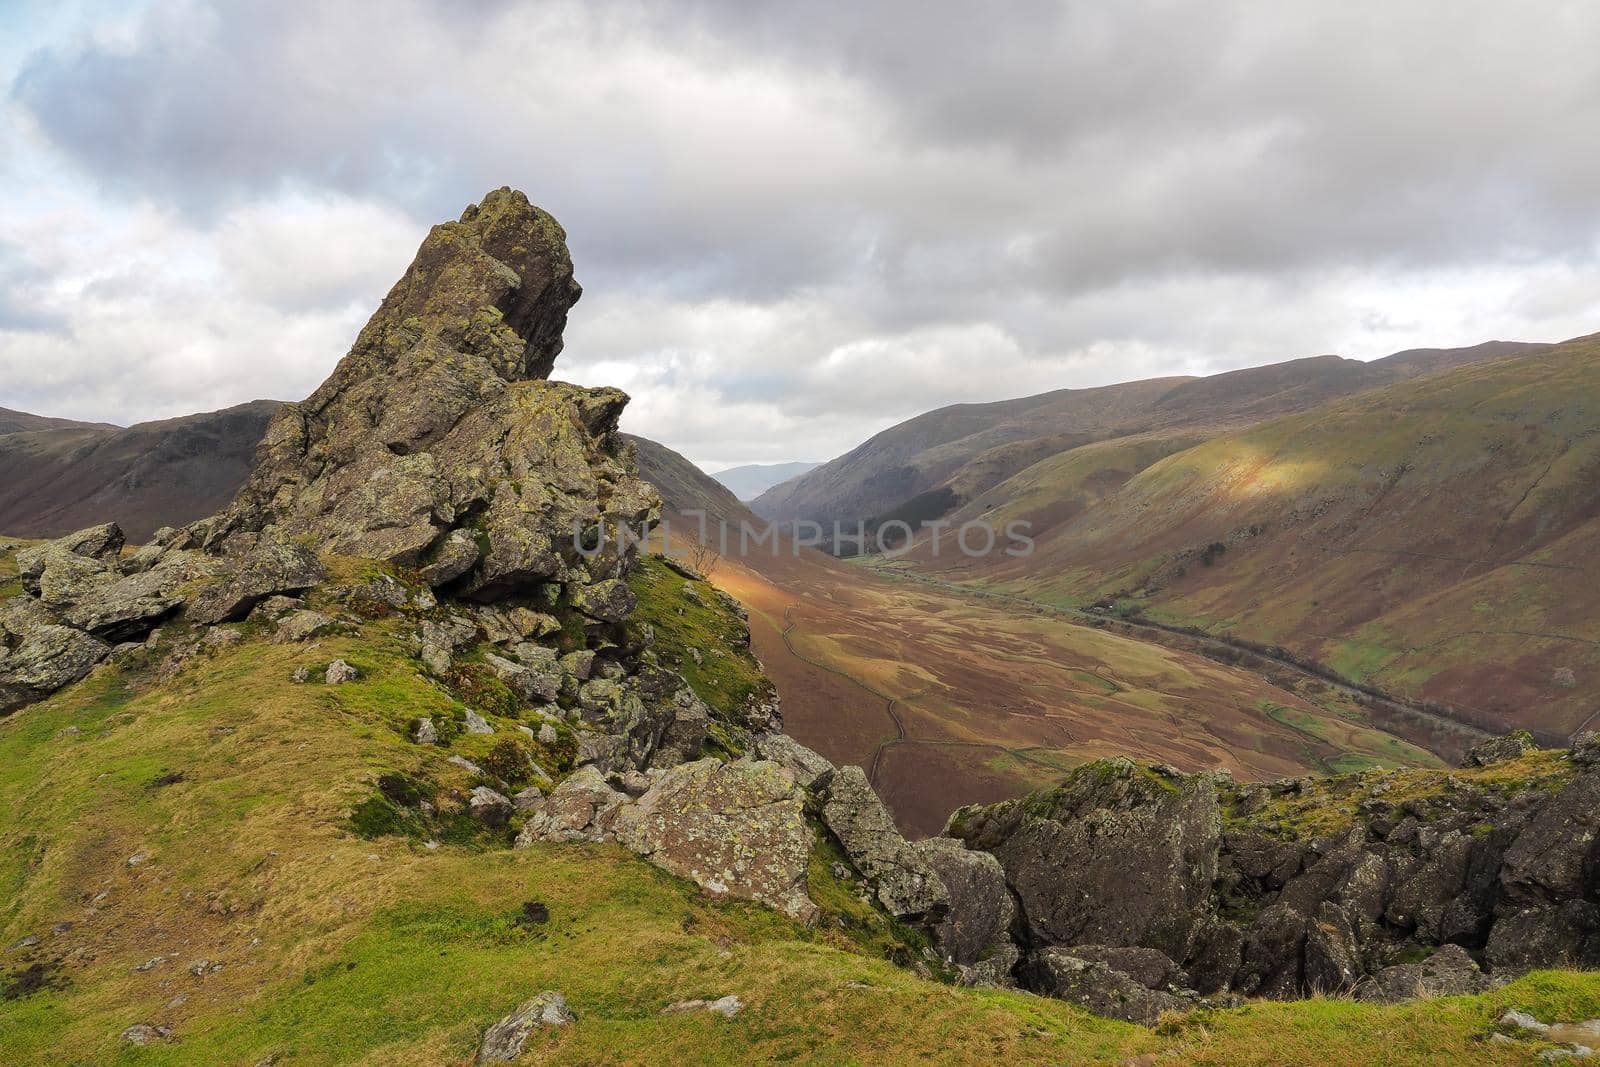 The rock formation known as 'The Howitzer' on Helm Crag overlooking the road through the valley, Lake District, UK